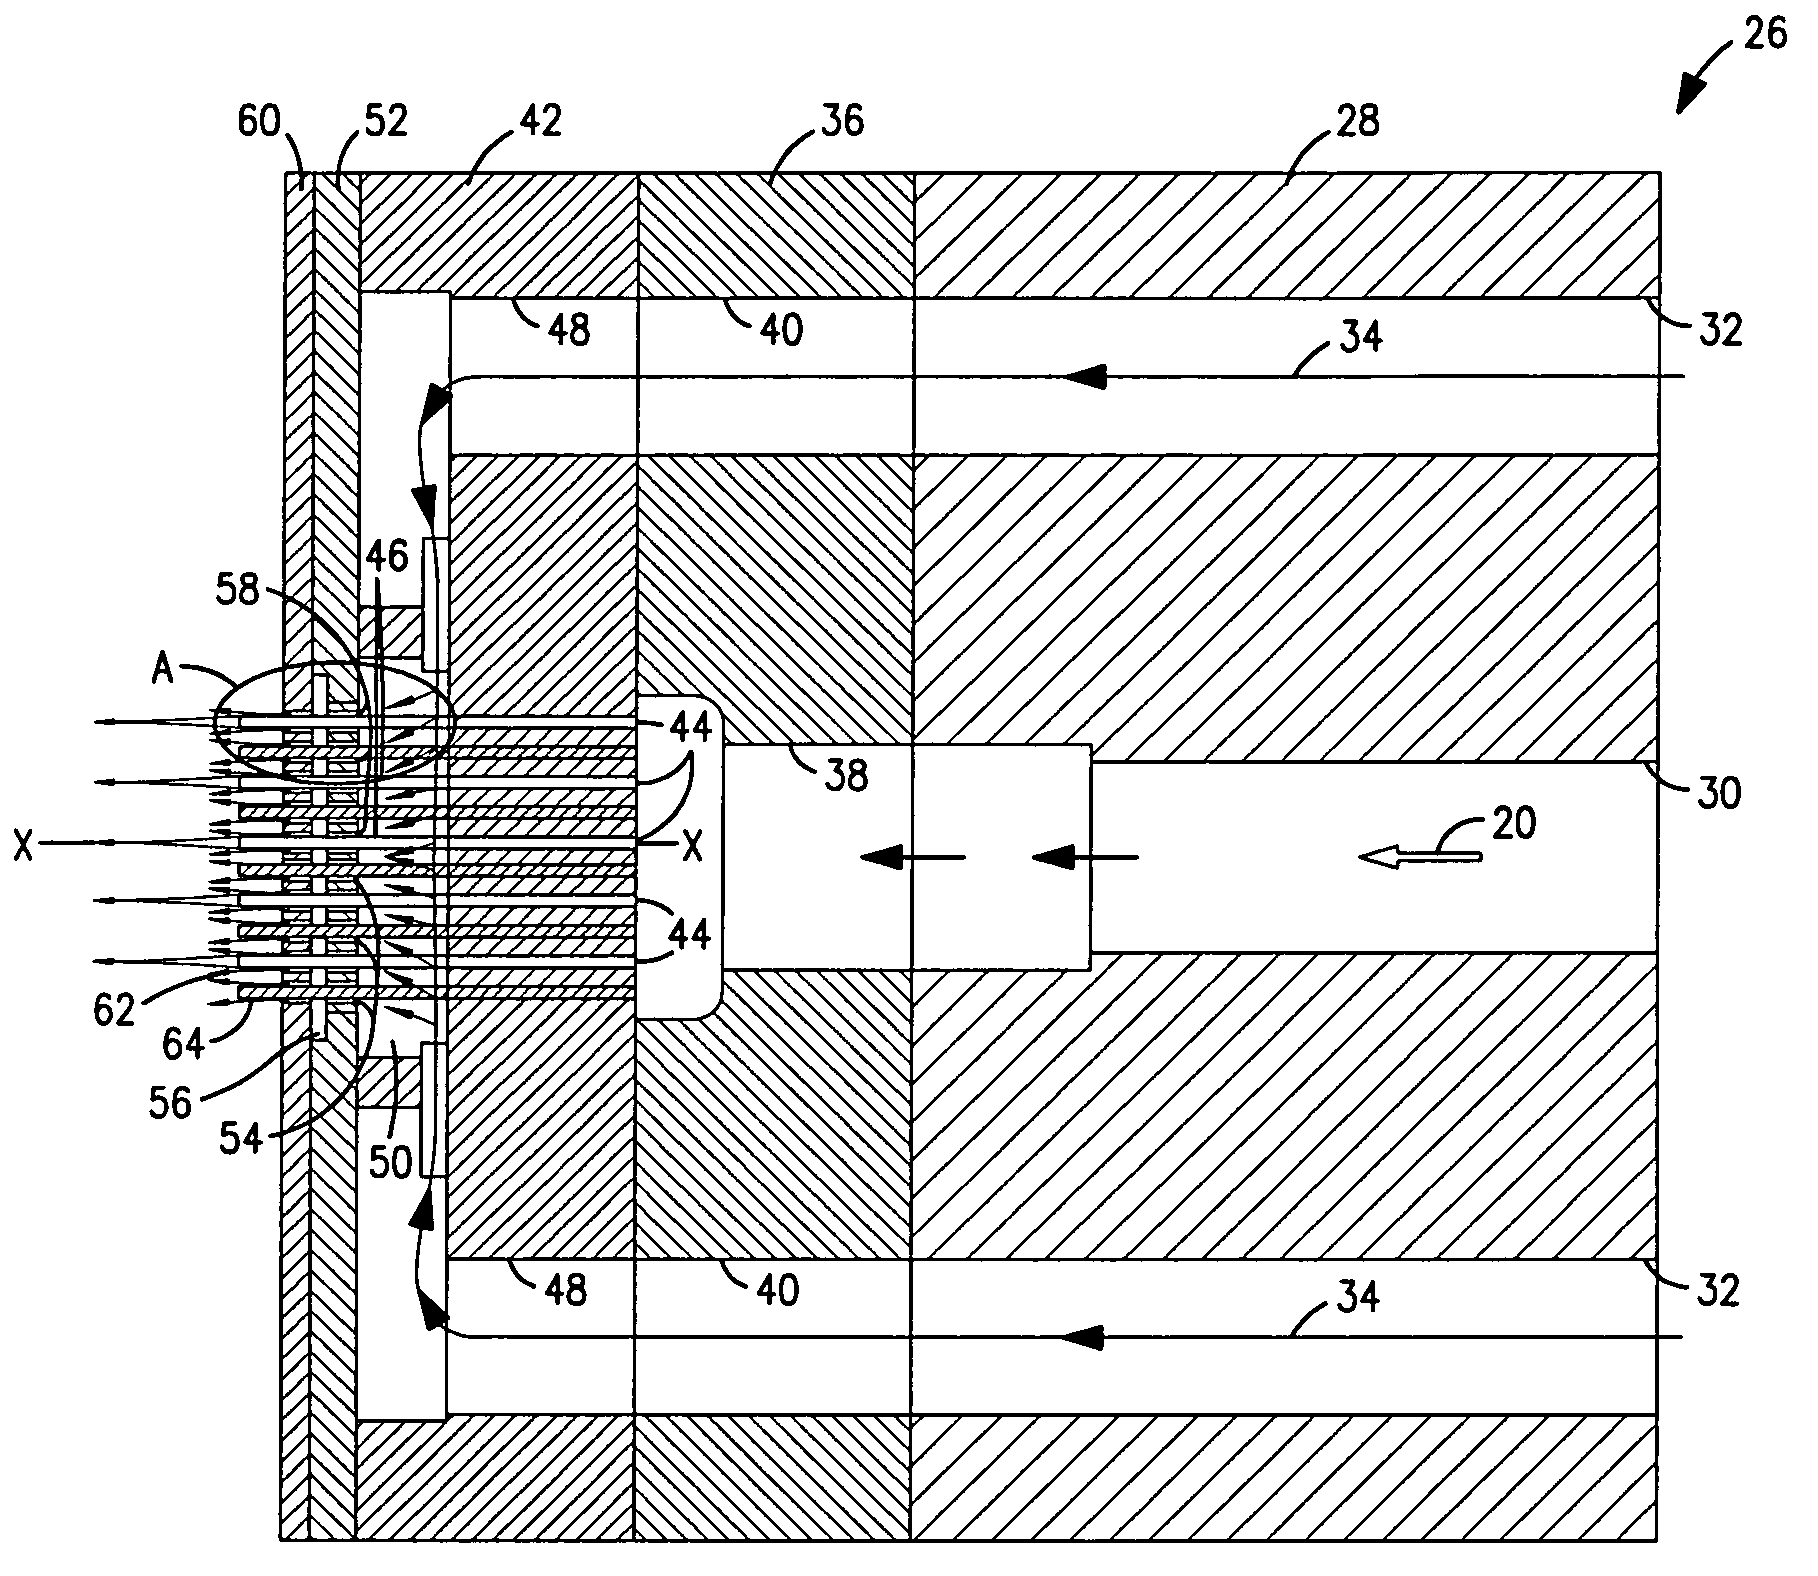 Apparatus for extruding cellulose fibers